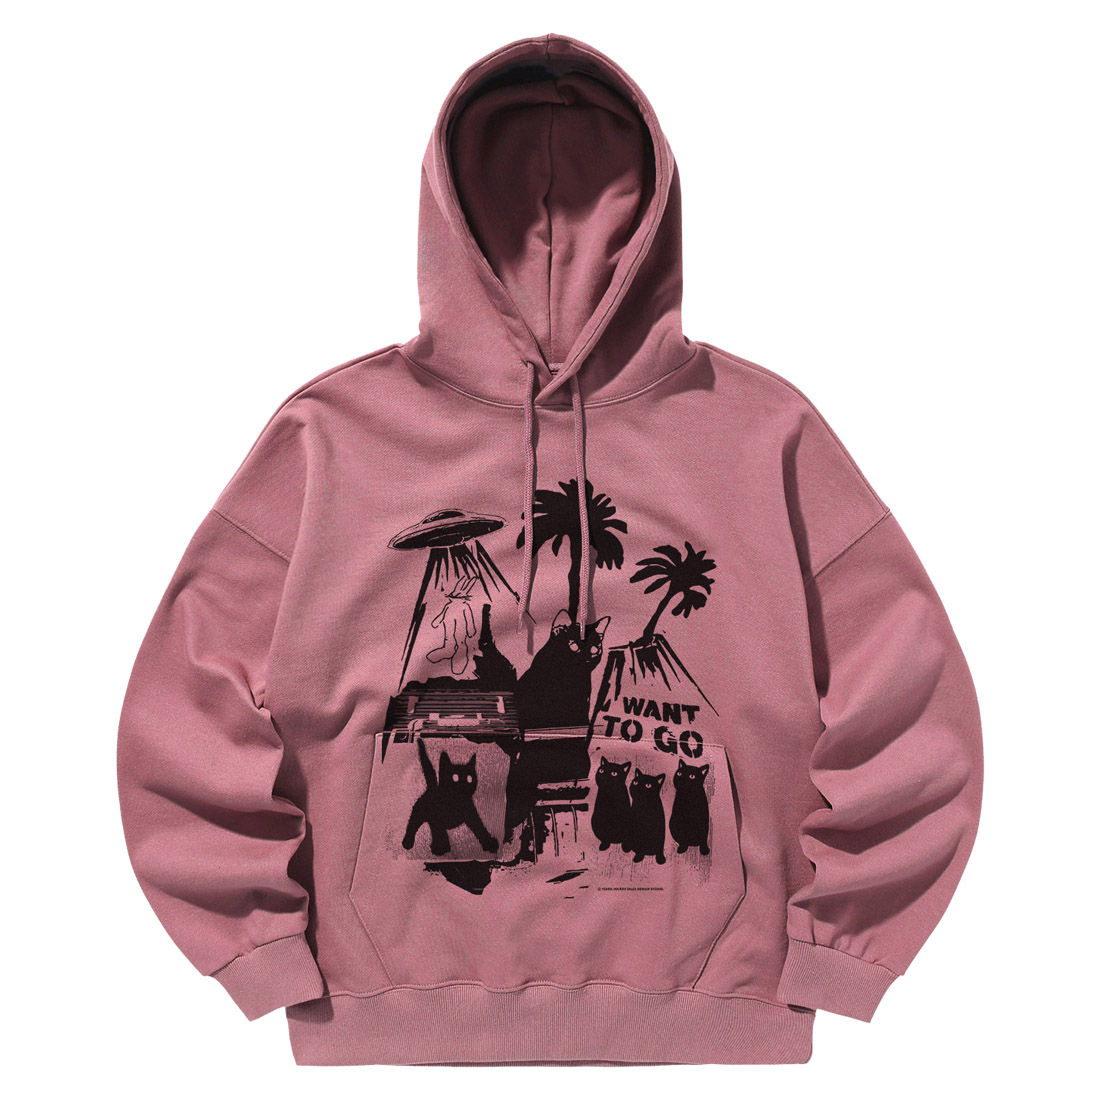 PIPIPOPO HOODIE [PINK]